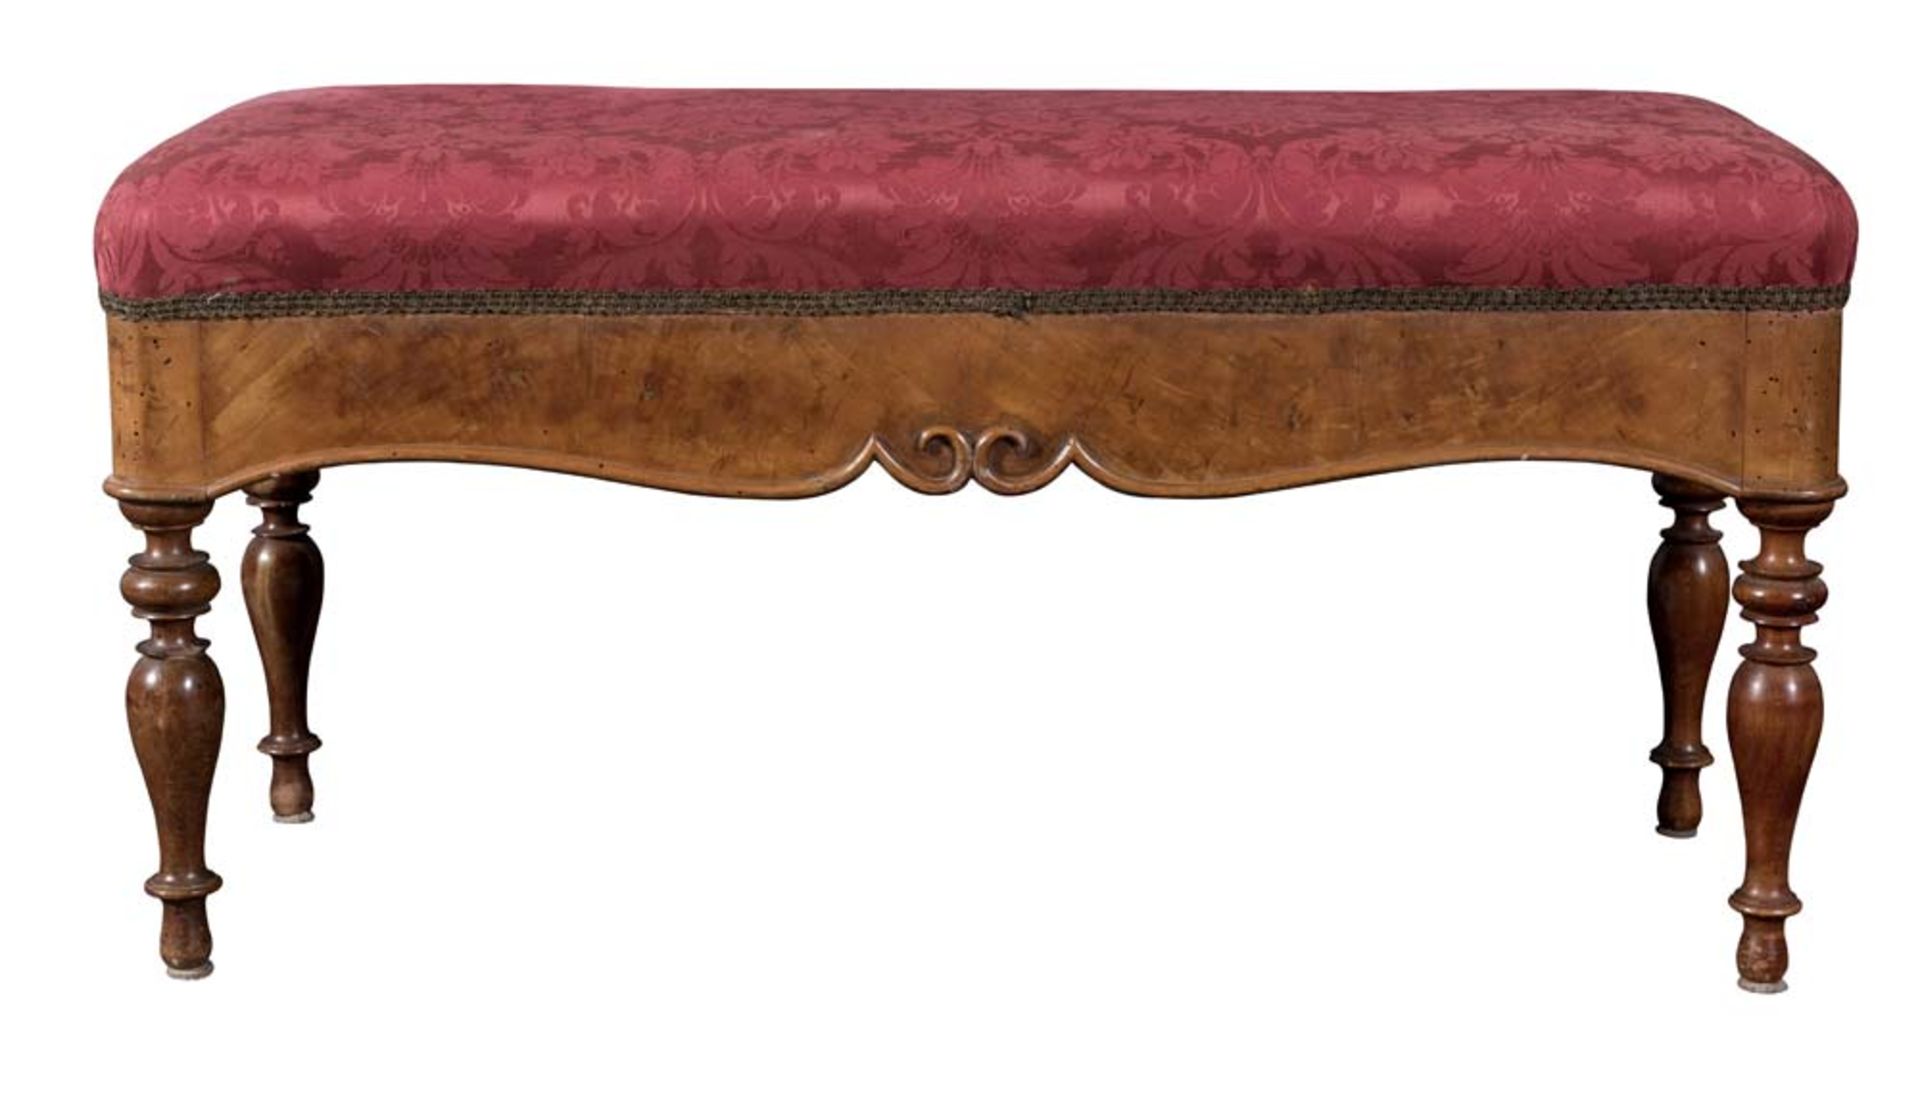 Small wood bench with red upholstery, late 19th Century. - Image 2 of 2